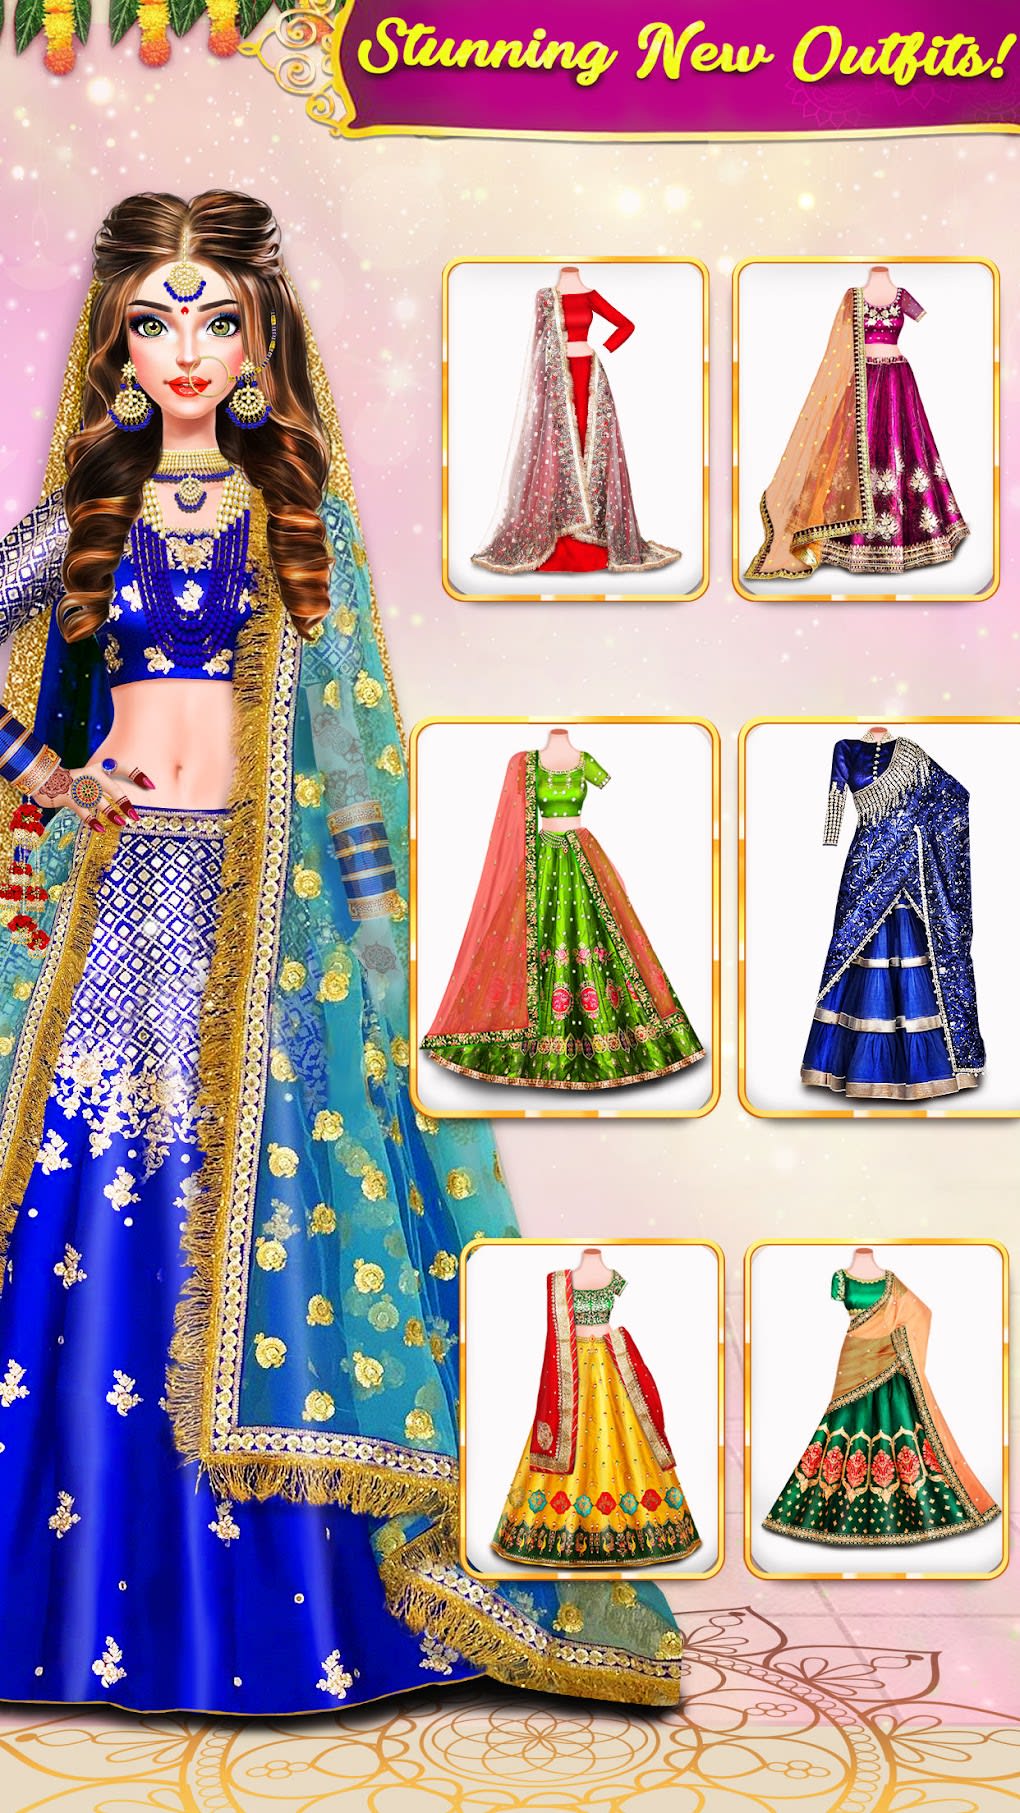 Barbie Wedding Dress Up Games Indian Style | Wedding Dress Styles | Barbie wedding  dress, Indian style wedding dress, Fashion dress up games